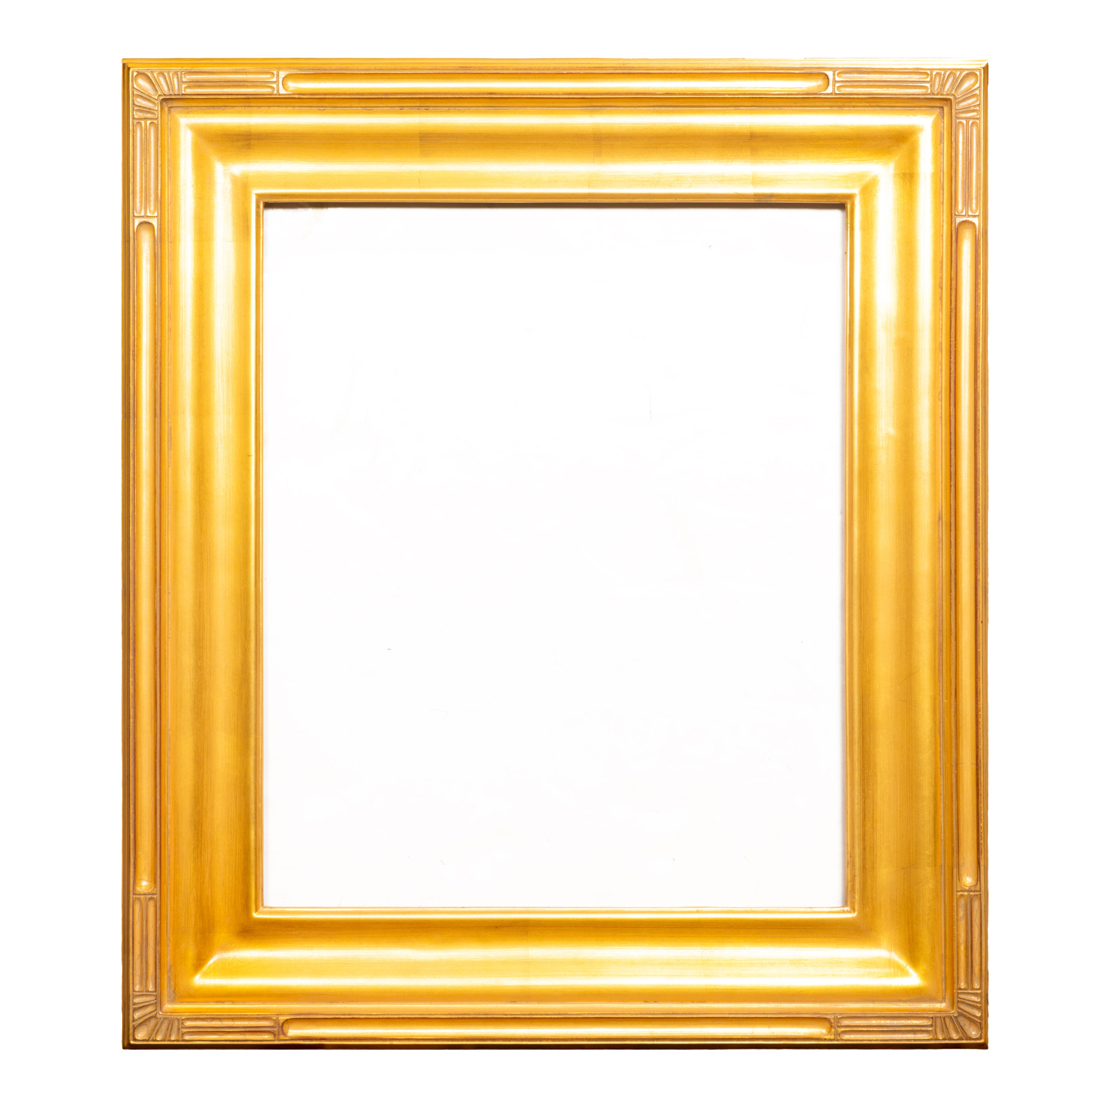 ARTS & CRAFTS STYLE GILTWOOD FRAME